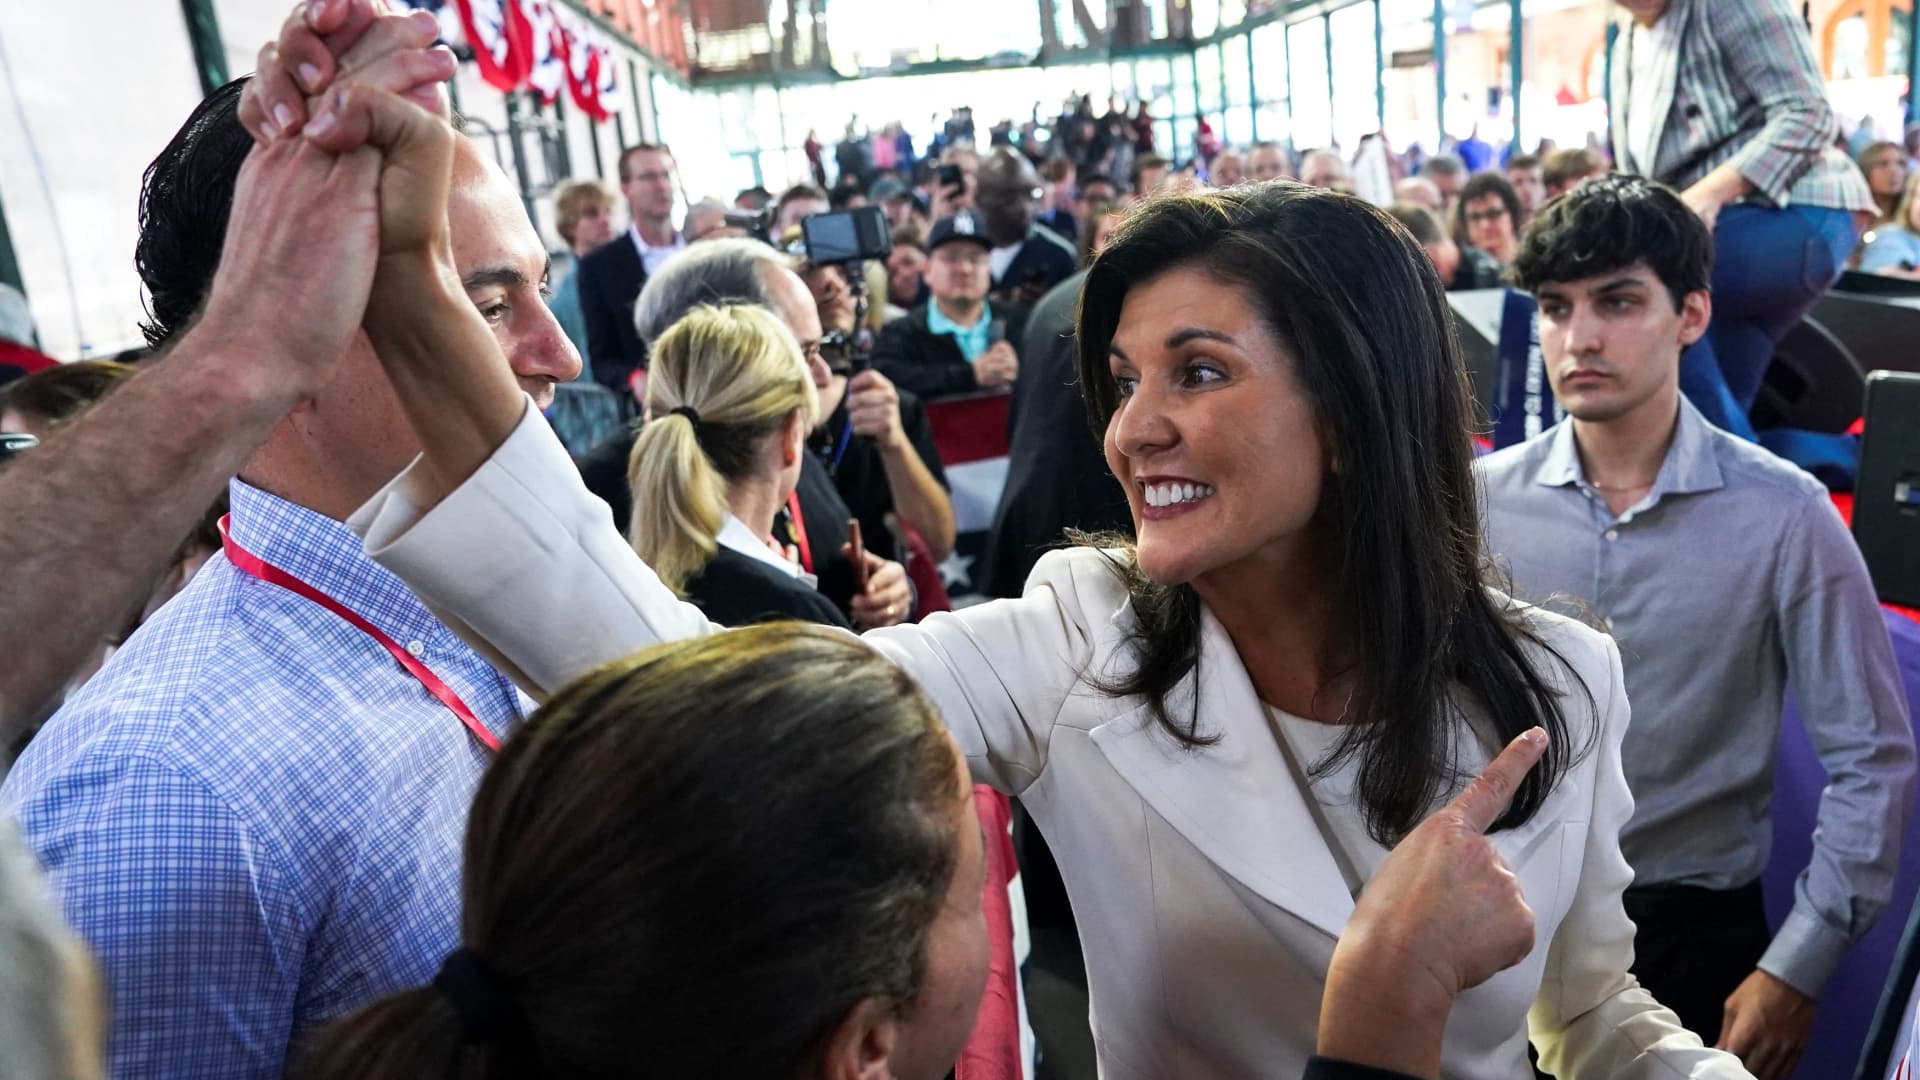 Former U.S. Ambassador to the United Nations Nikki Haley meets with supporters as she announces her run for the 2024 Republican presidential nomination at a campaign event in Charleston, South Carolina, U.S. February 15, 2023. REUTERS/Allison Joyce